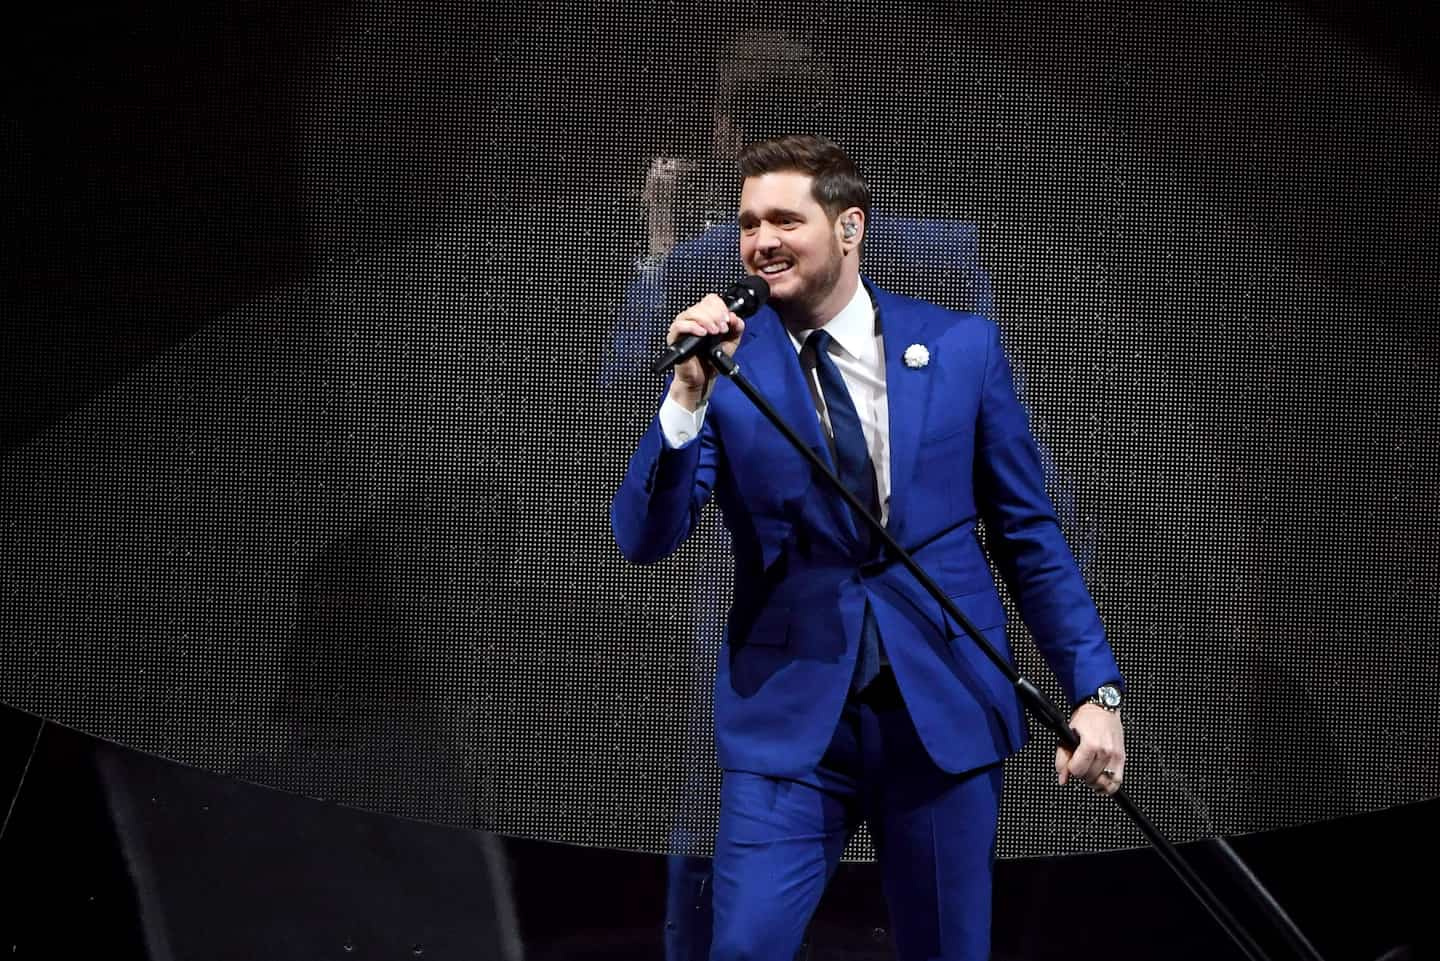 Michael Bublé back at the Videotron Center in October